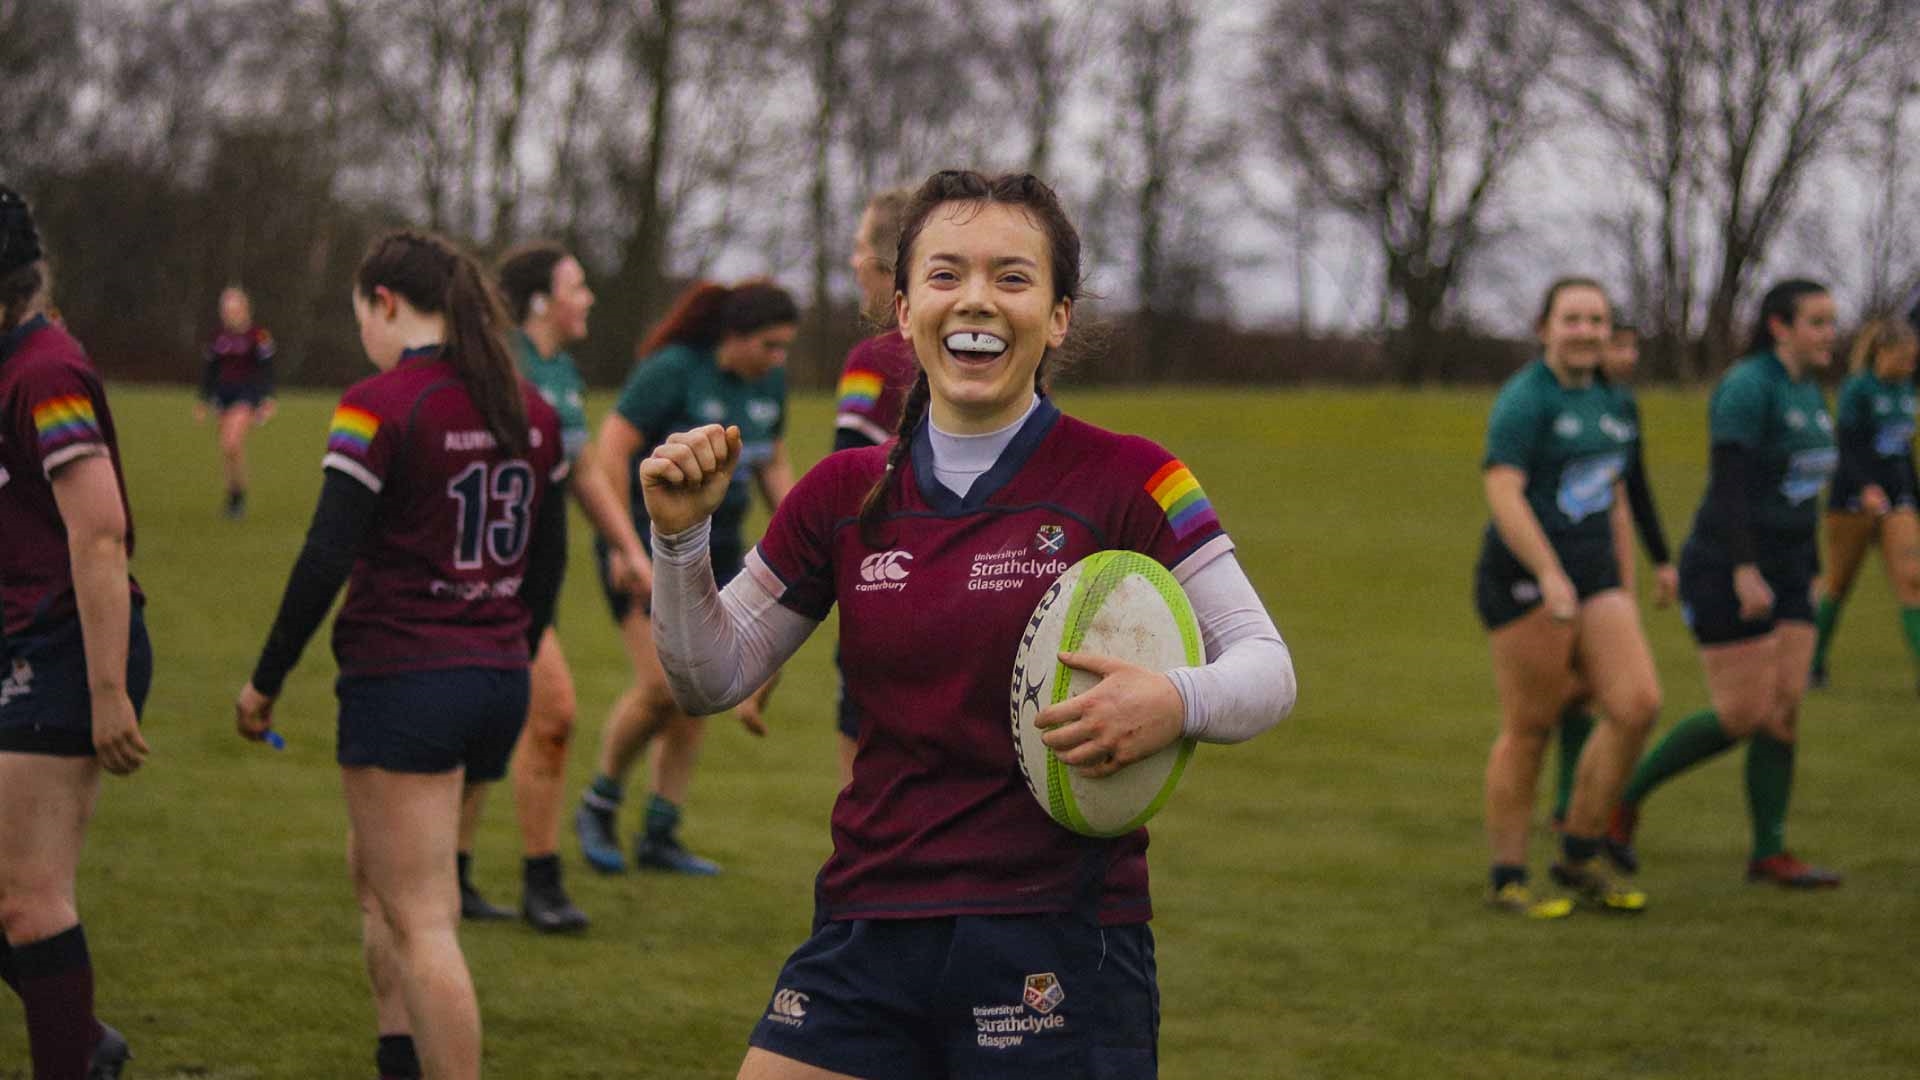 Strathclyde Women's Rugby player in field, holding rugby ball and smiling to the camera in celebration.